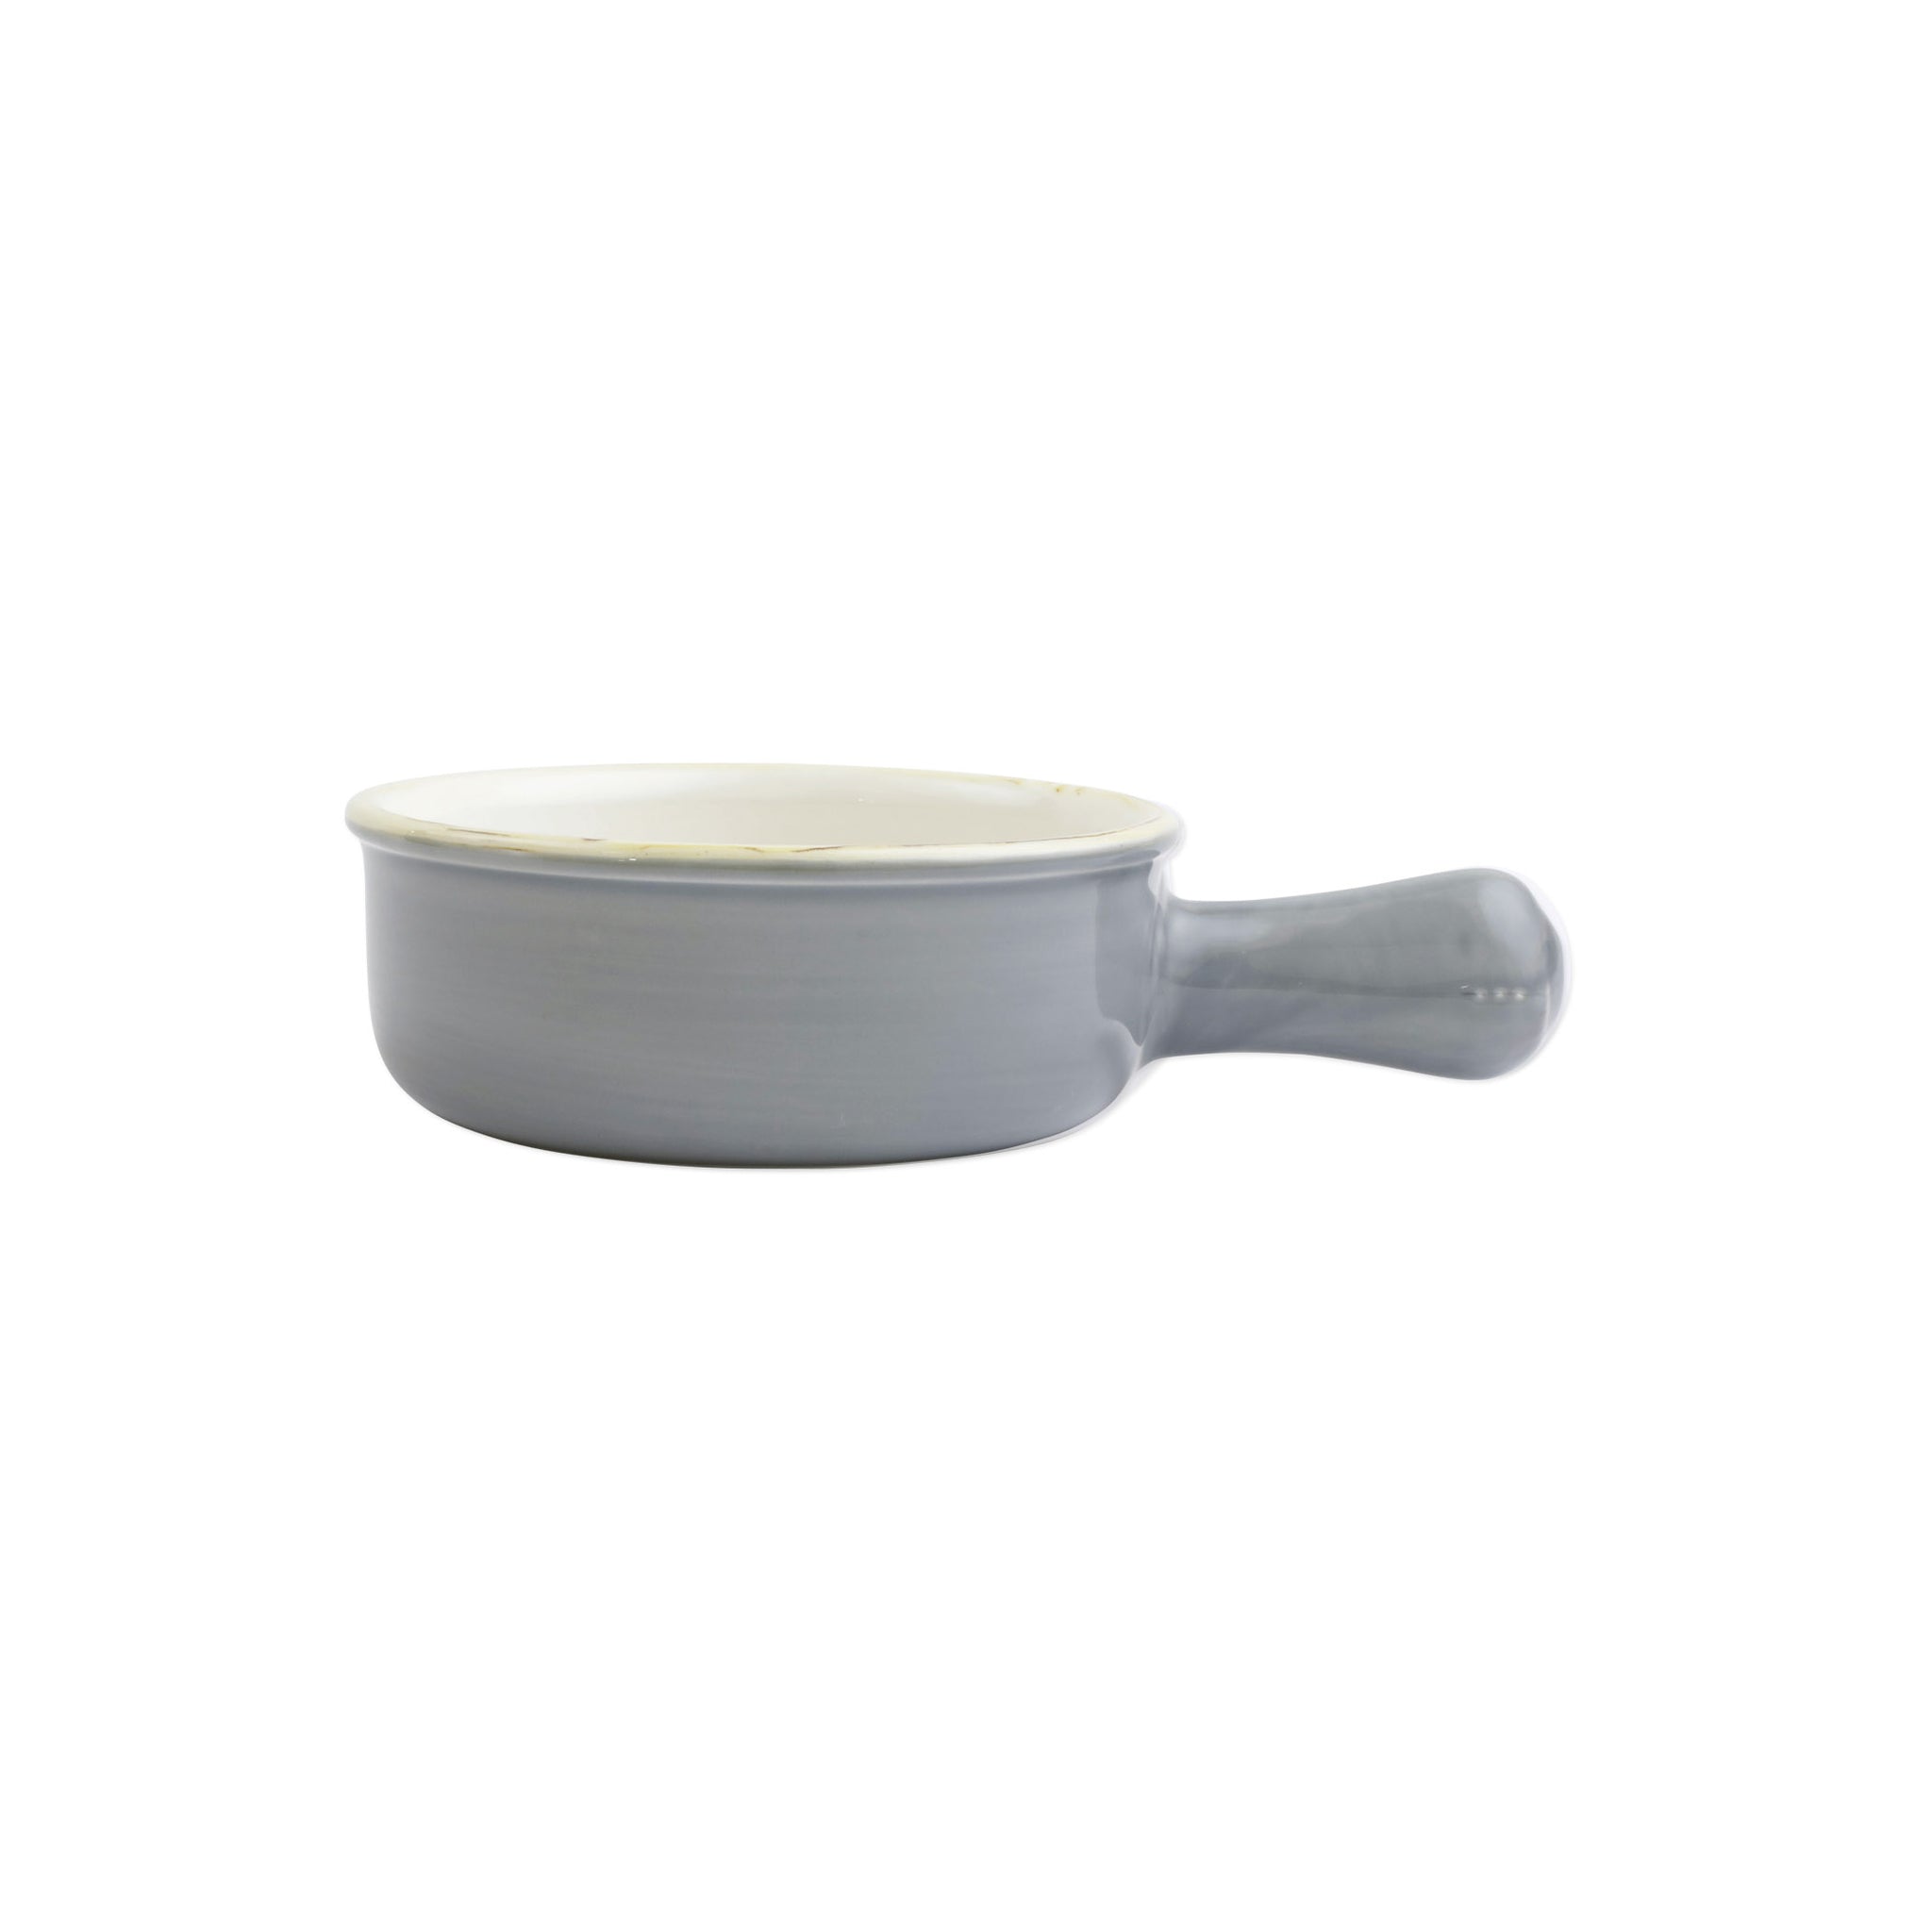 Italian Bakers Small Round Baker with Large Handle - Gray